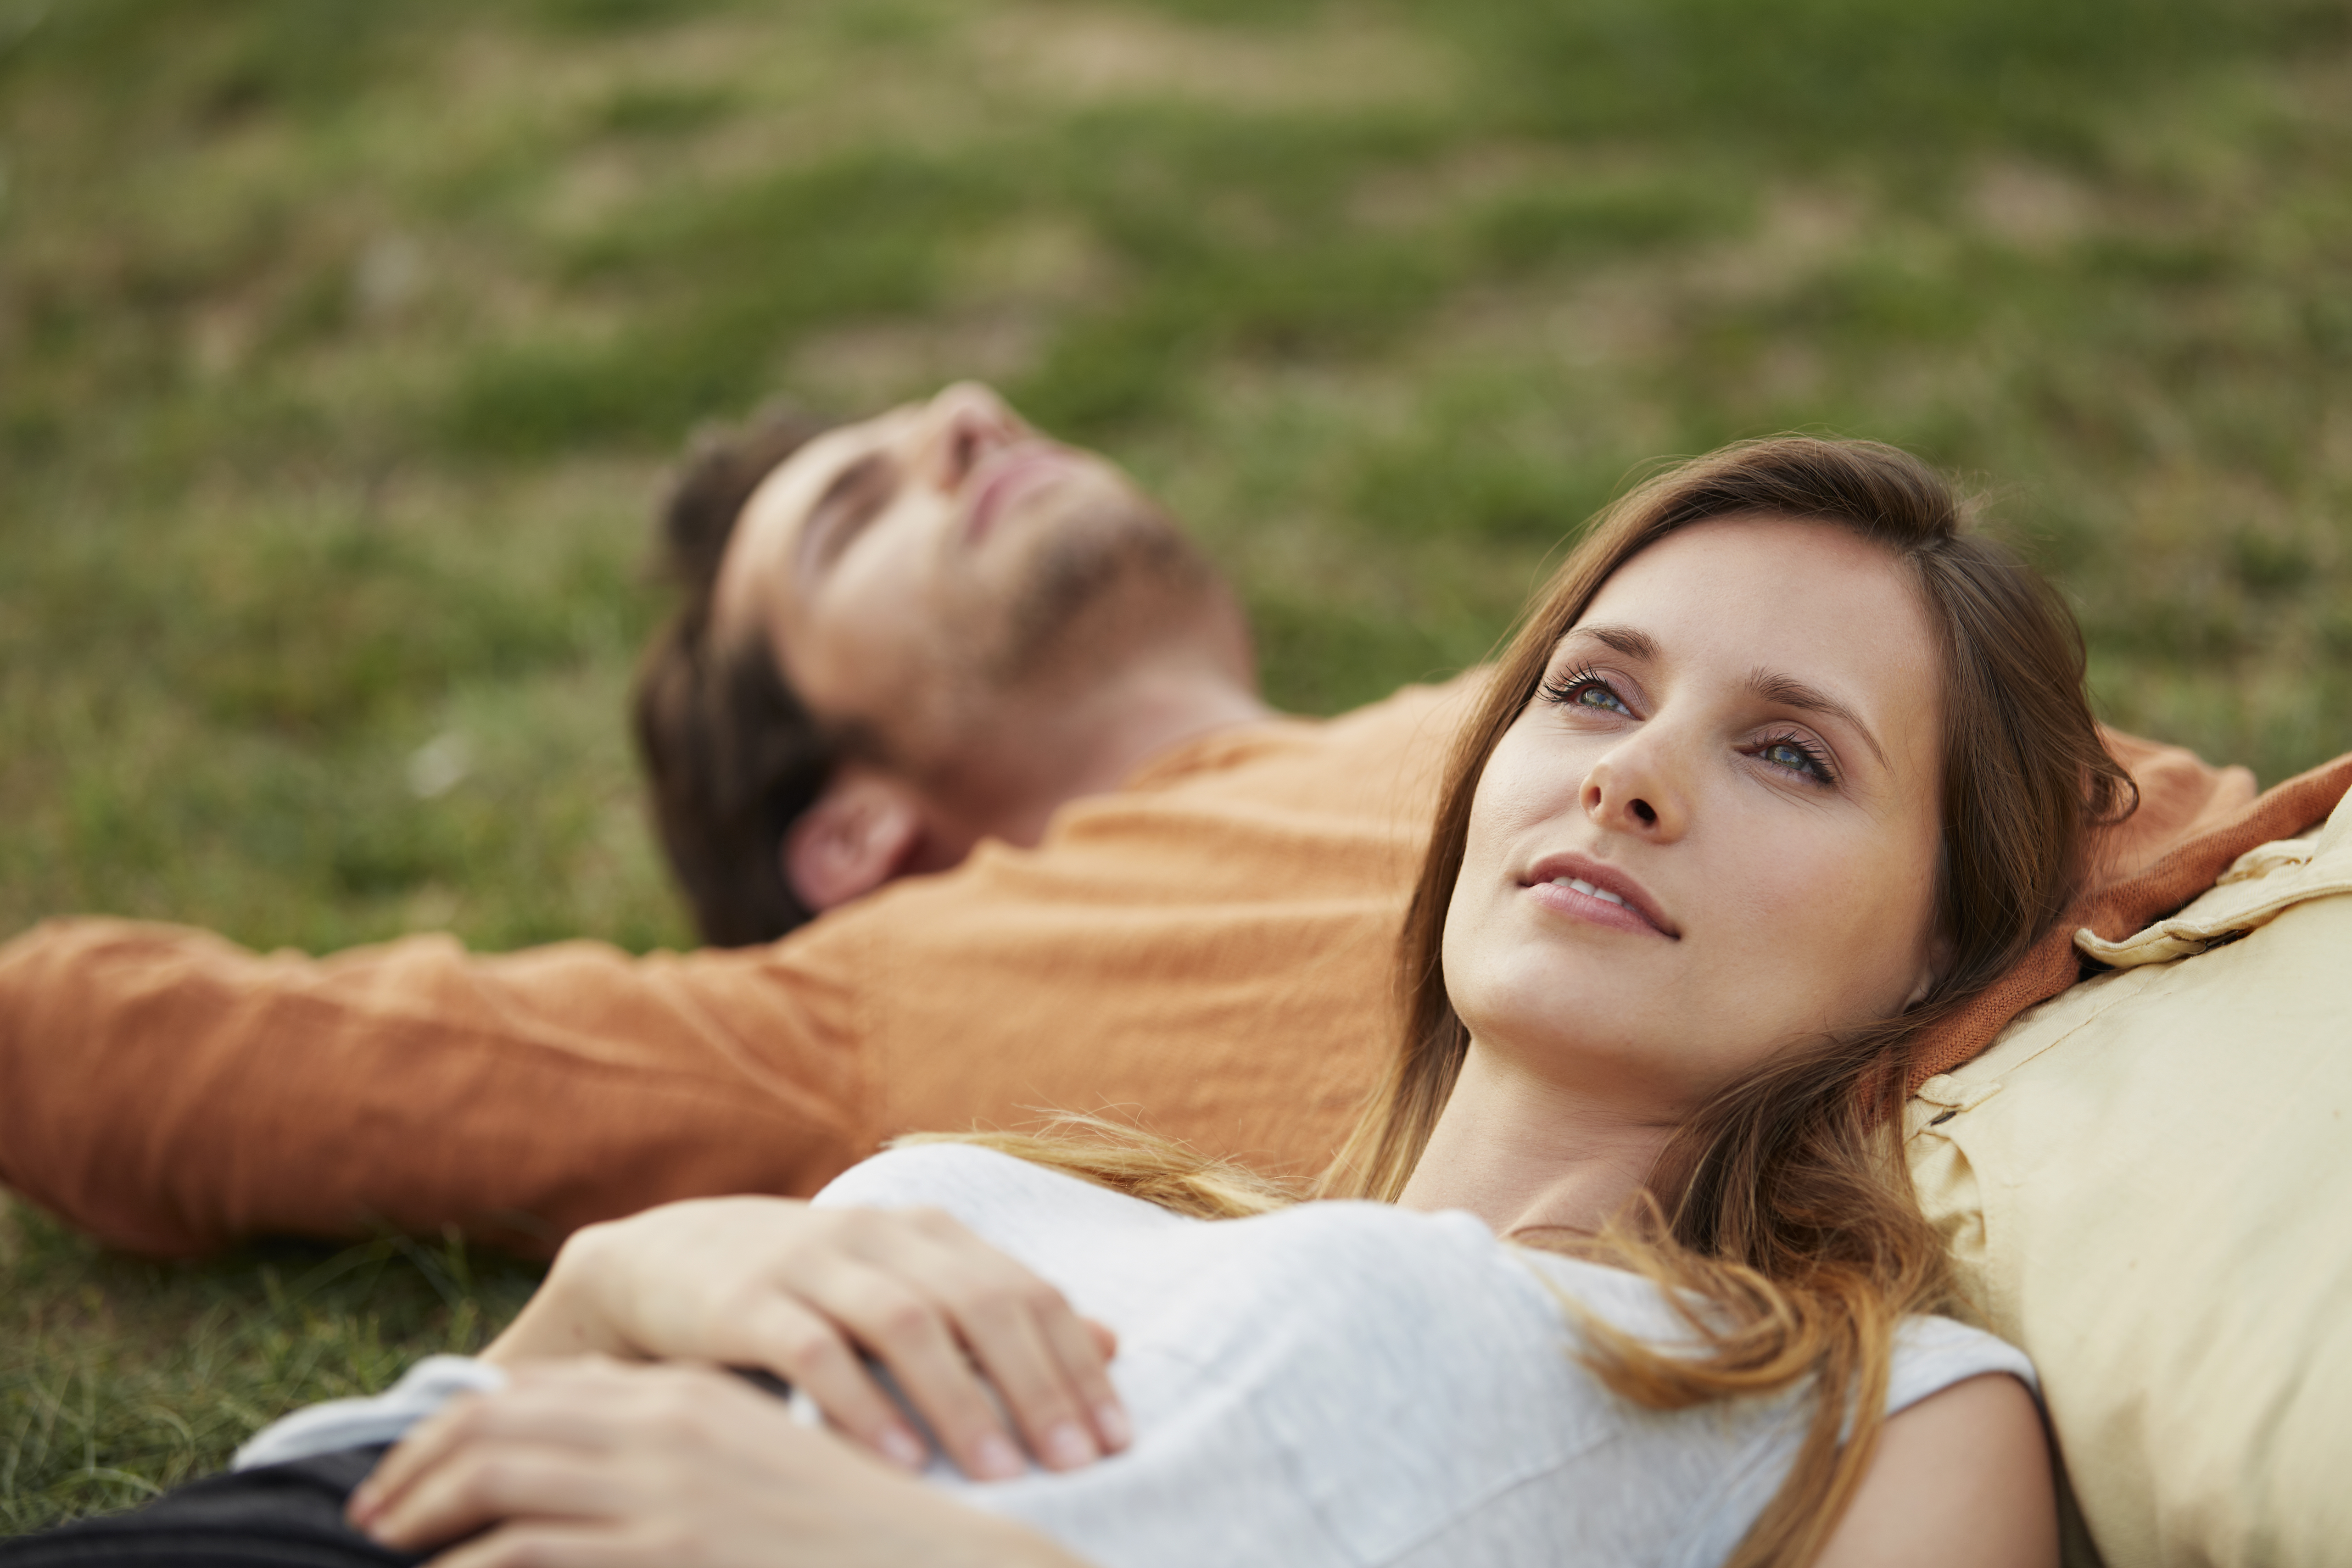 Woman resting head on man's stomach at park | Source: Getty Images